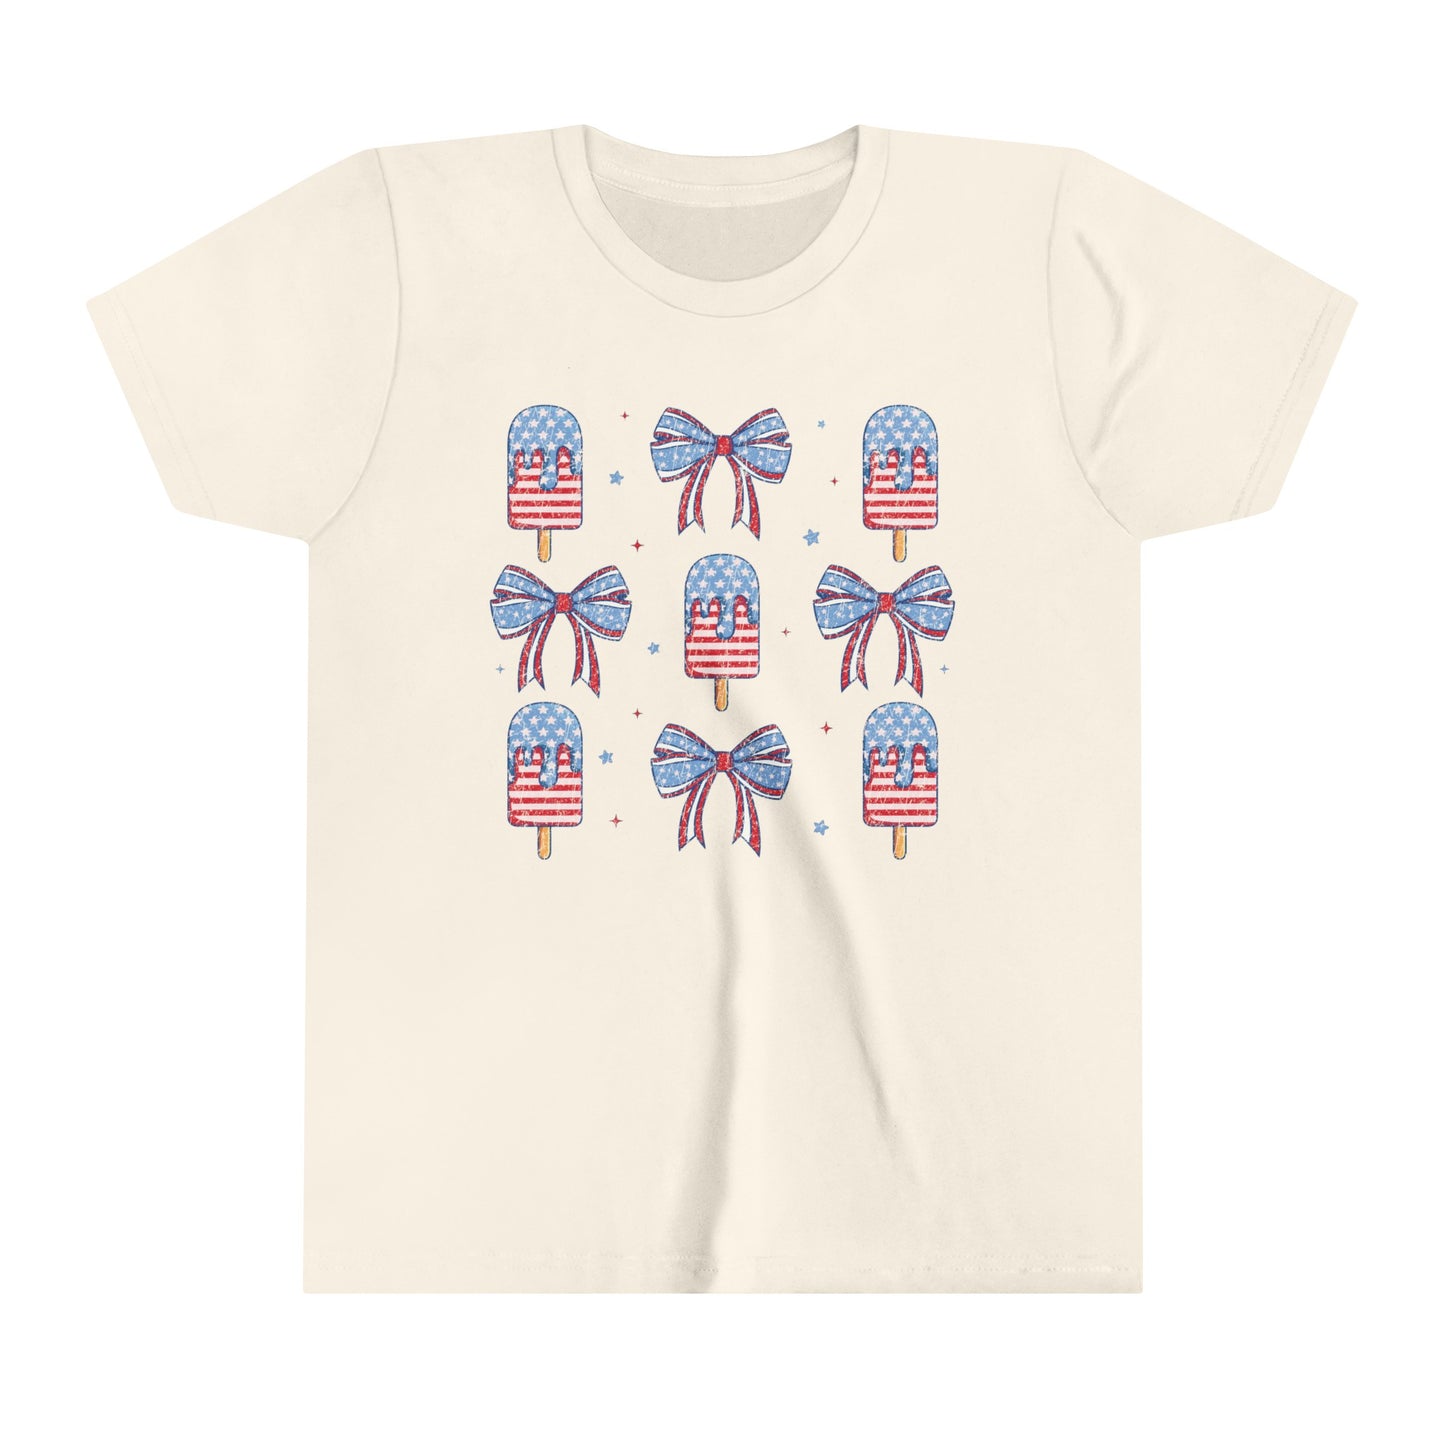 Popsicle and Ribbons 4th of July USA Youth Shirt